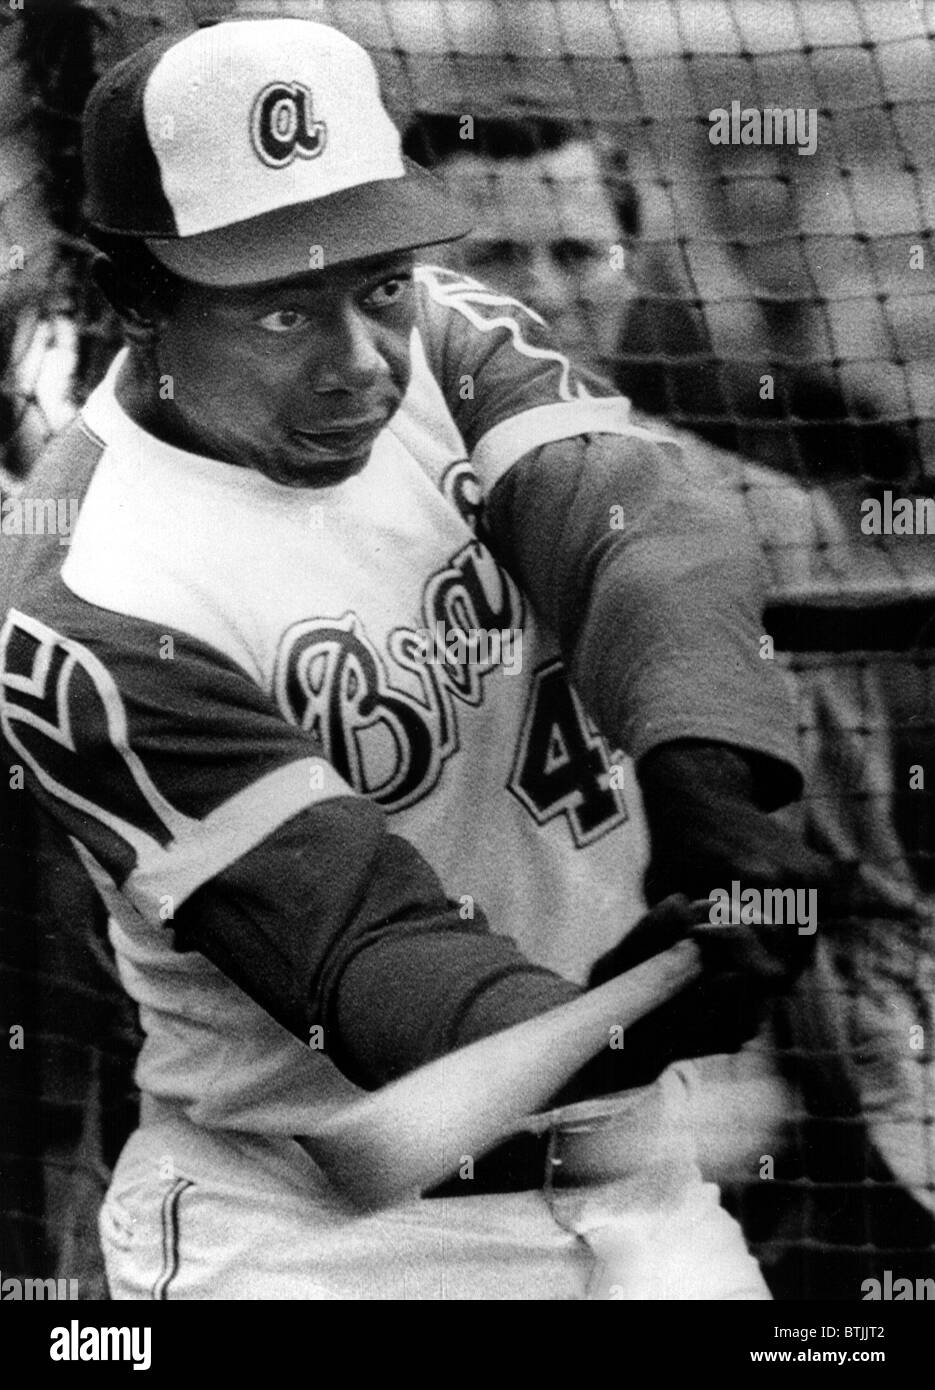 Hank Aaron knocks one out of the park during batting practice in Los Angeles, 1974 Stock Photo